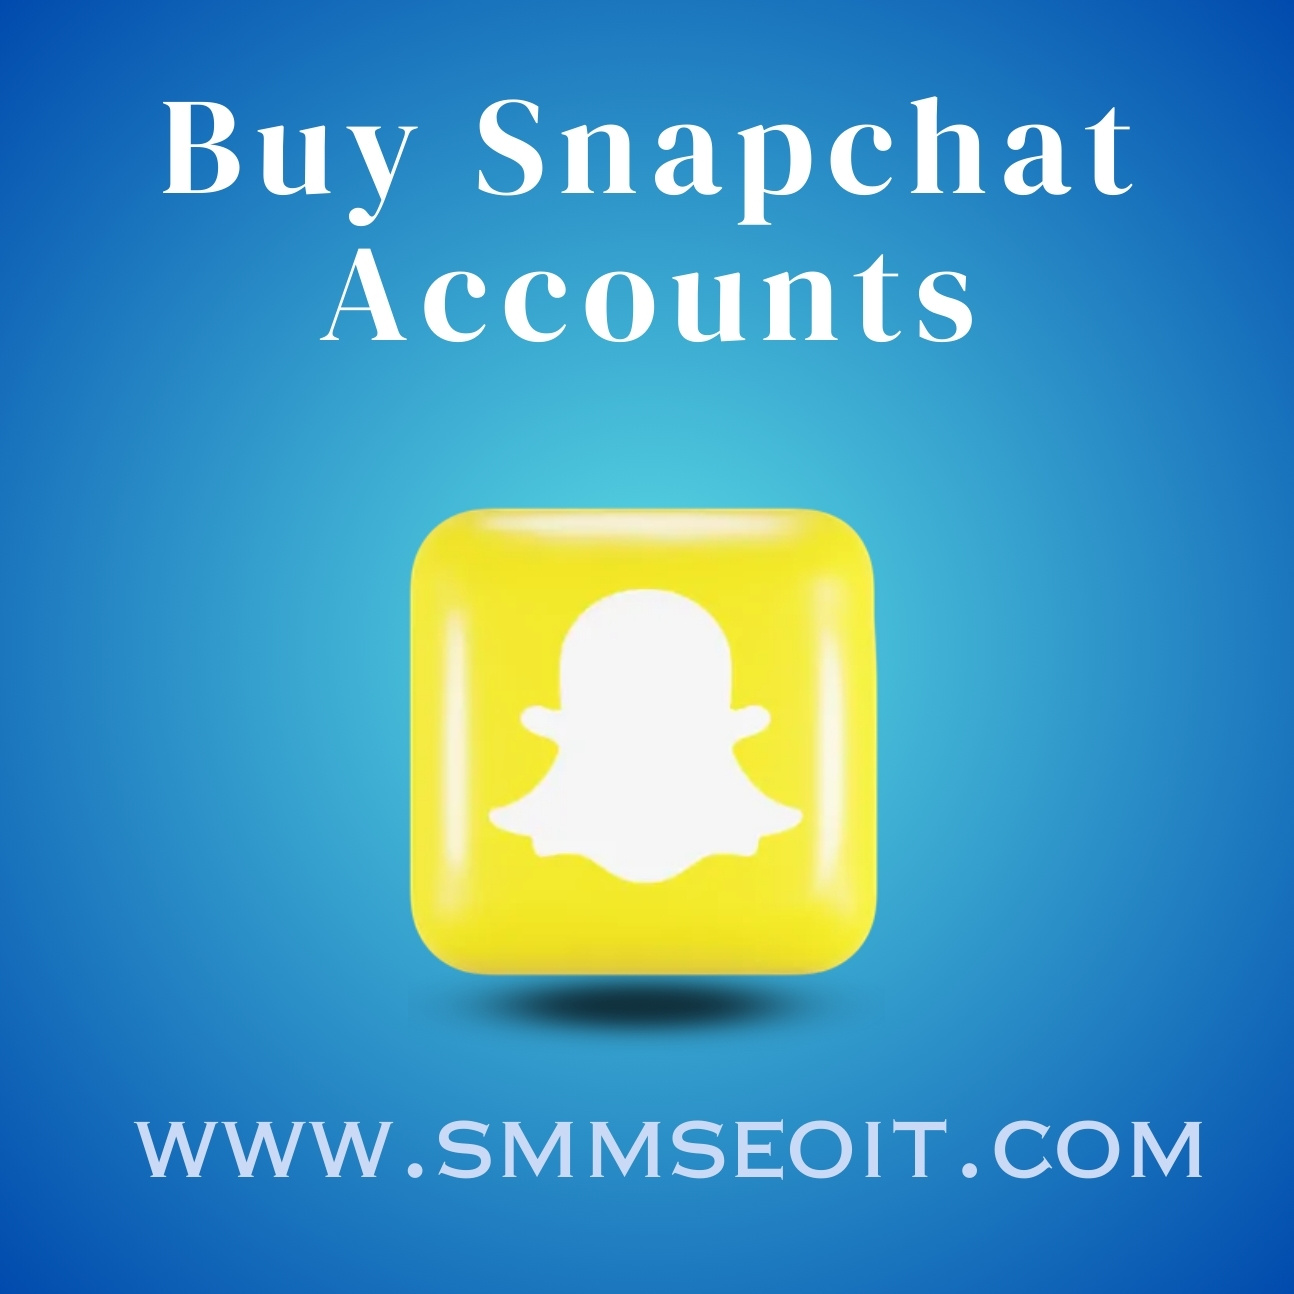 Buy Snapchat Accounts - 100% Secure & Instant Delivery